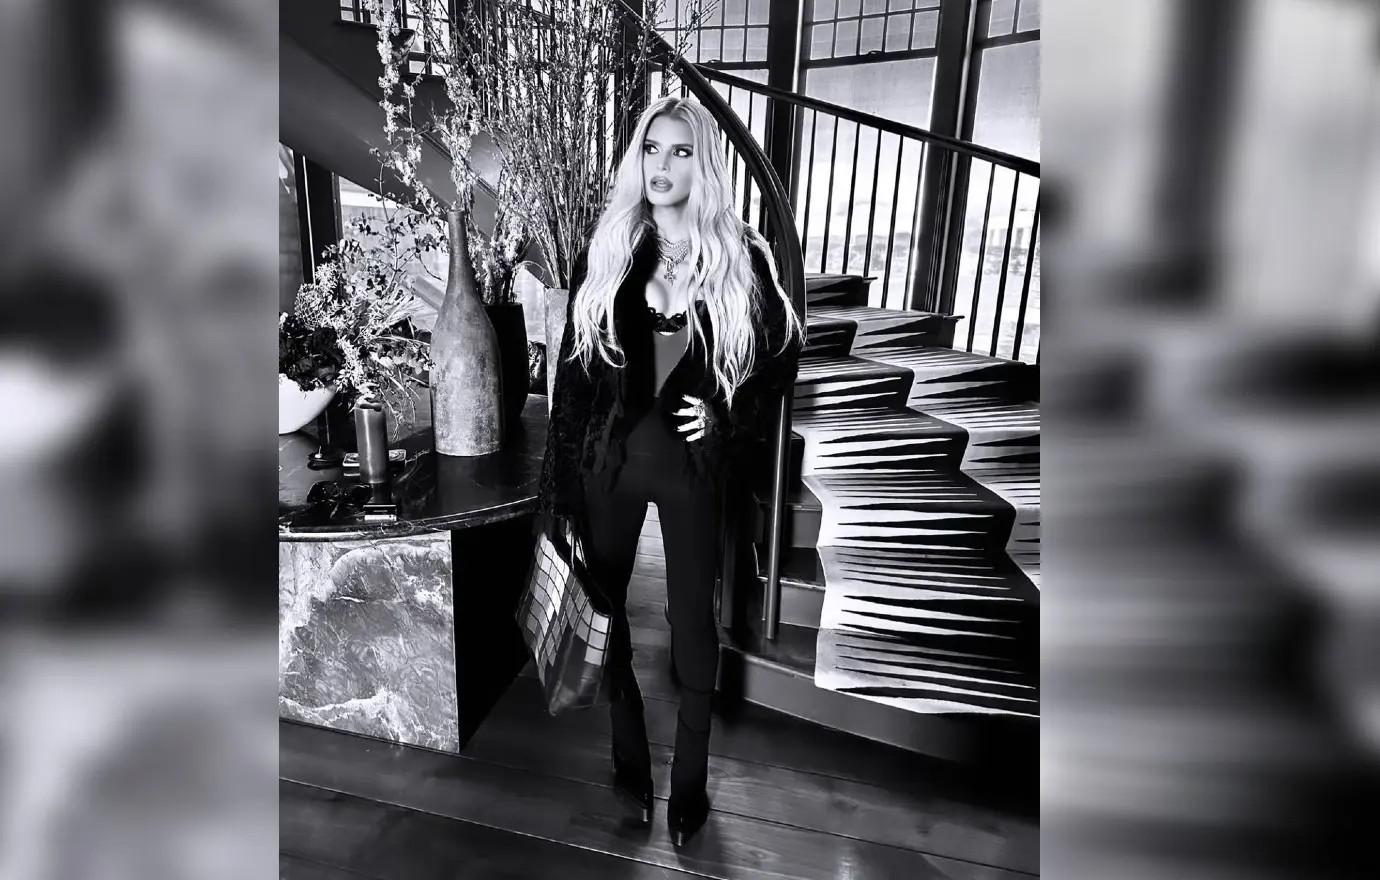 Jessica Simpson sparks concern with thin frame in new photos after drastic  100-lb weight loss